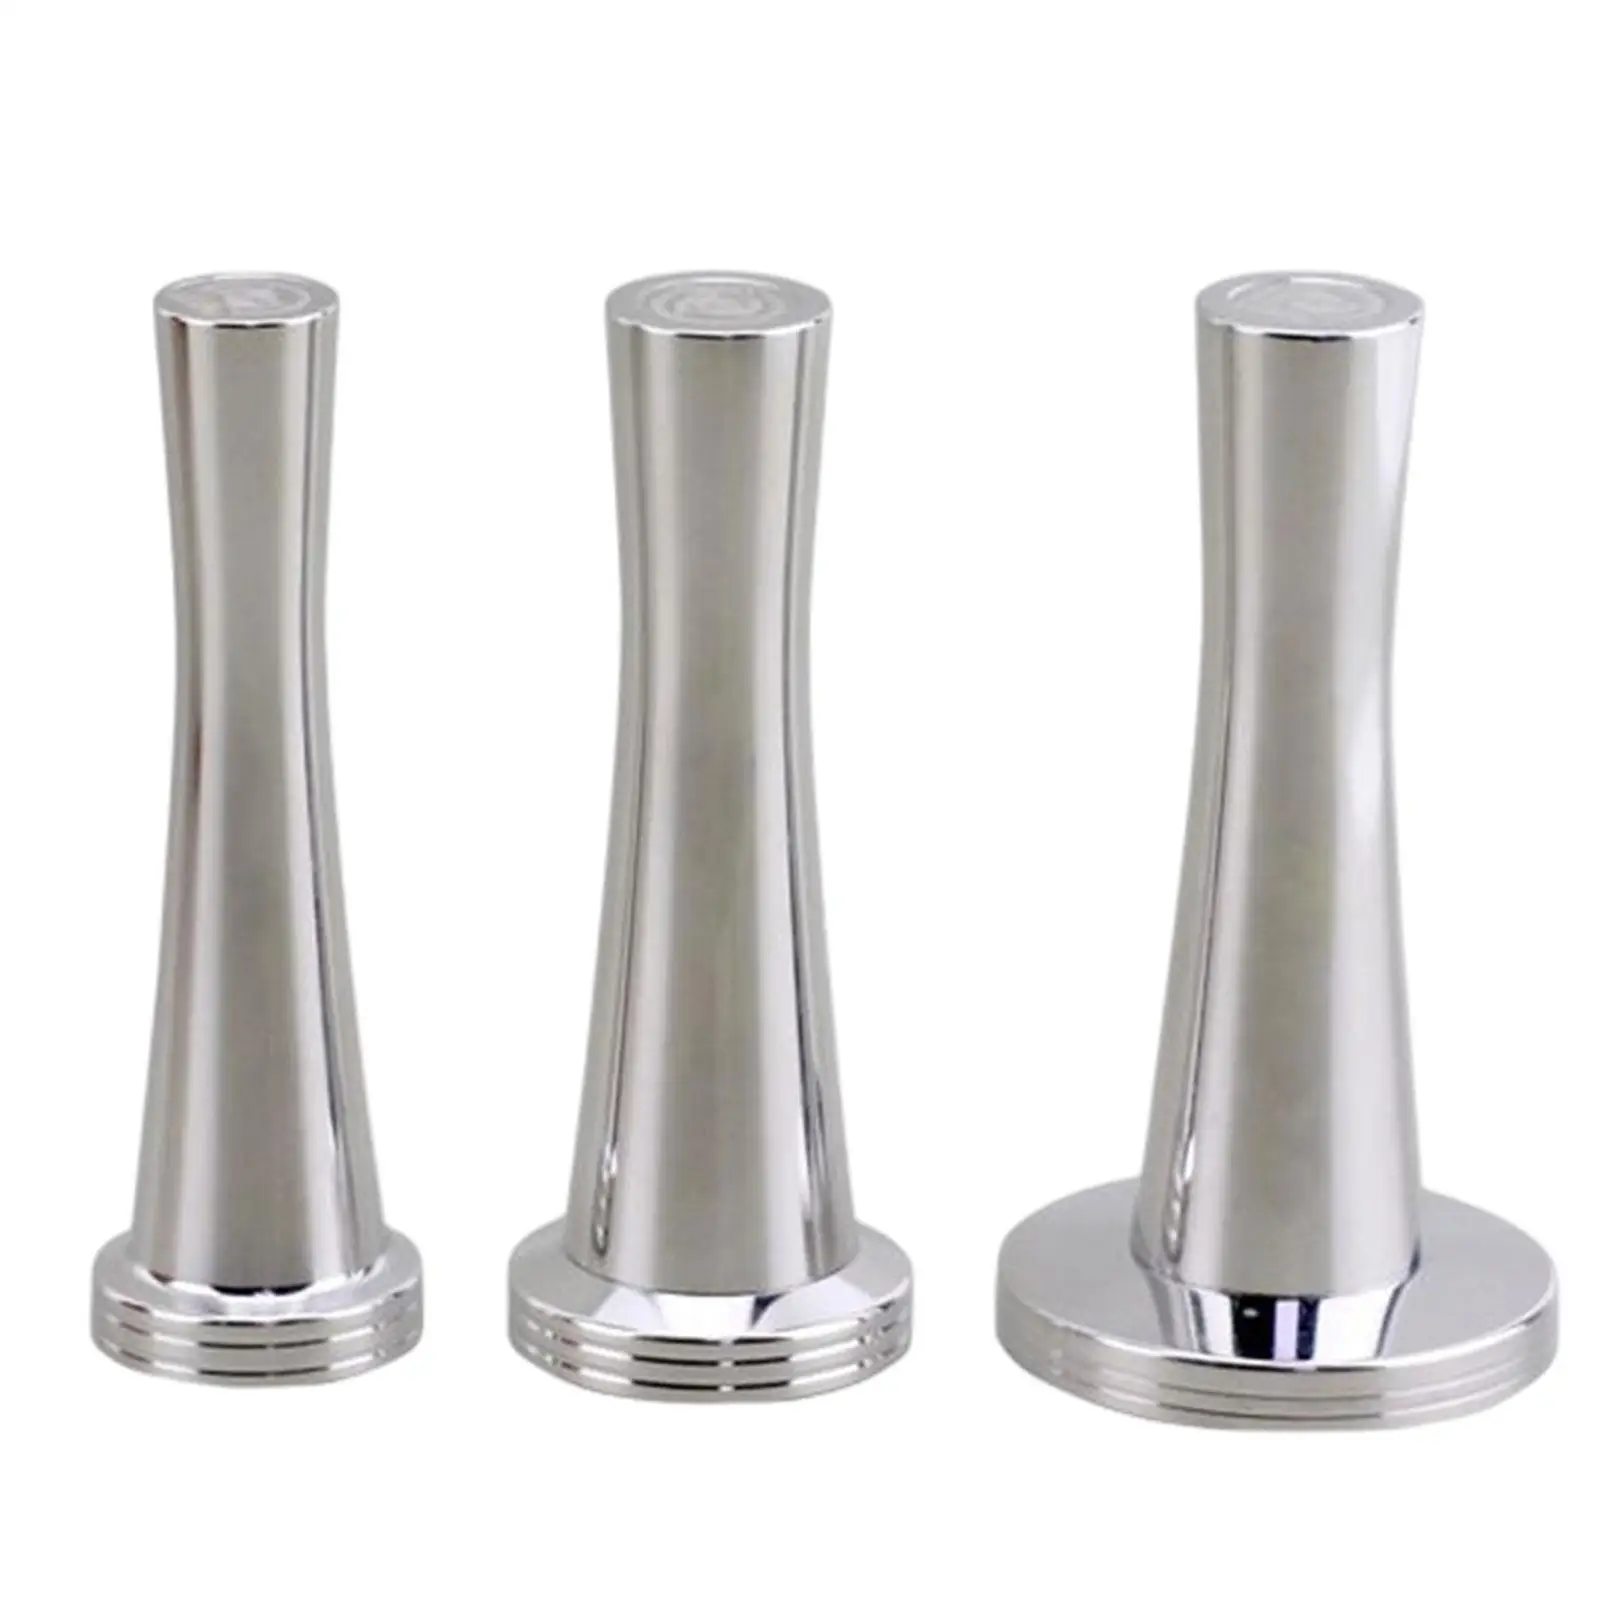 Portable Hand Tampers Metal Gifts Durable Professional Gadget Accessories Espresso Leveler for Cafe Restaurant Office